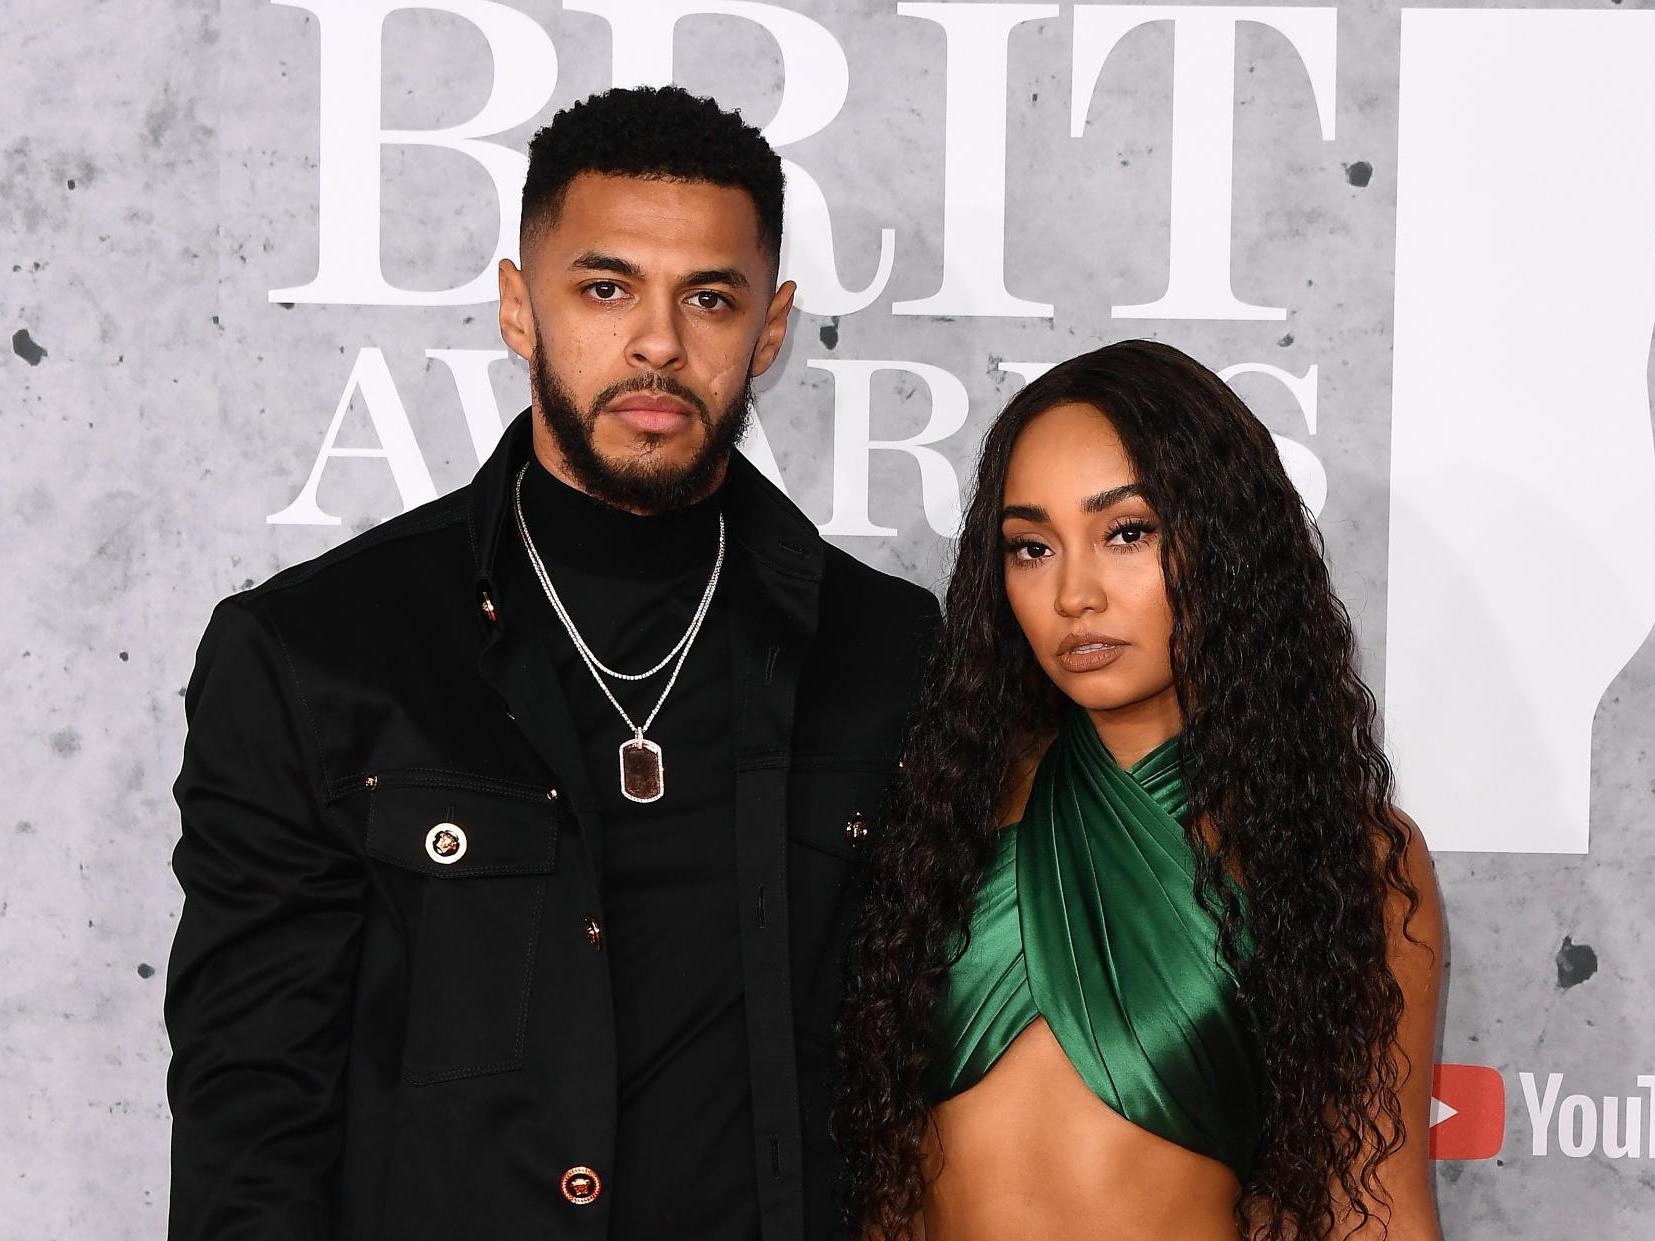 Leigh-Anne Little Mix singer engaged to Watford footballer Andre Gray | The Independent | The